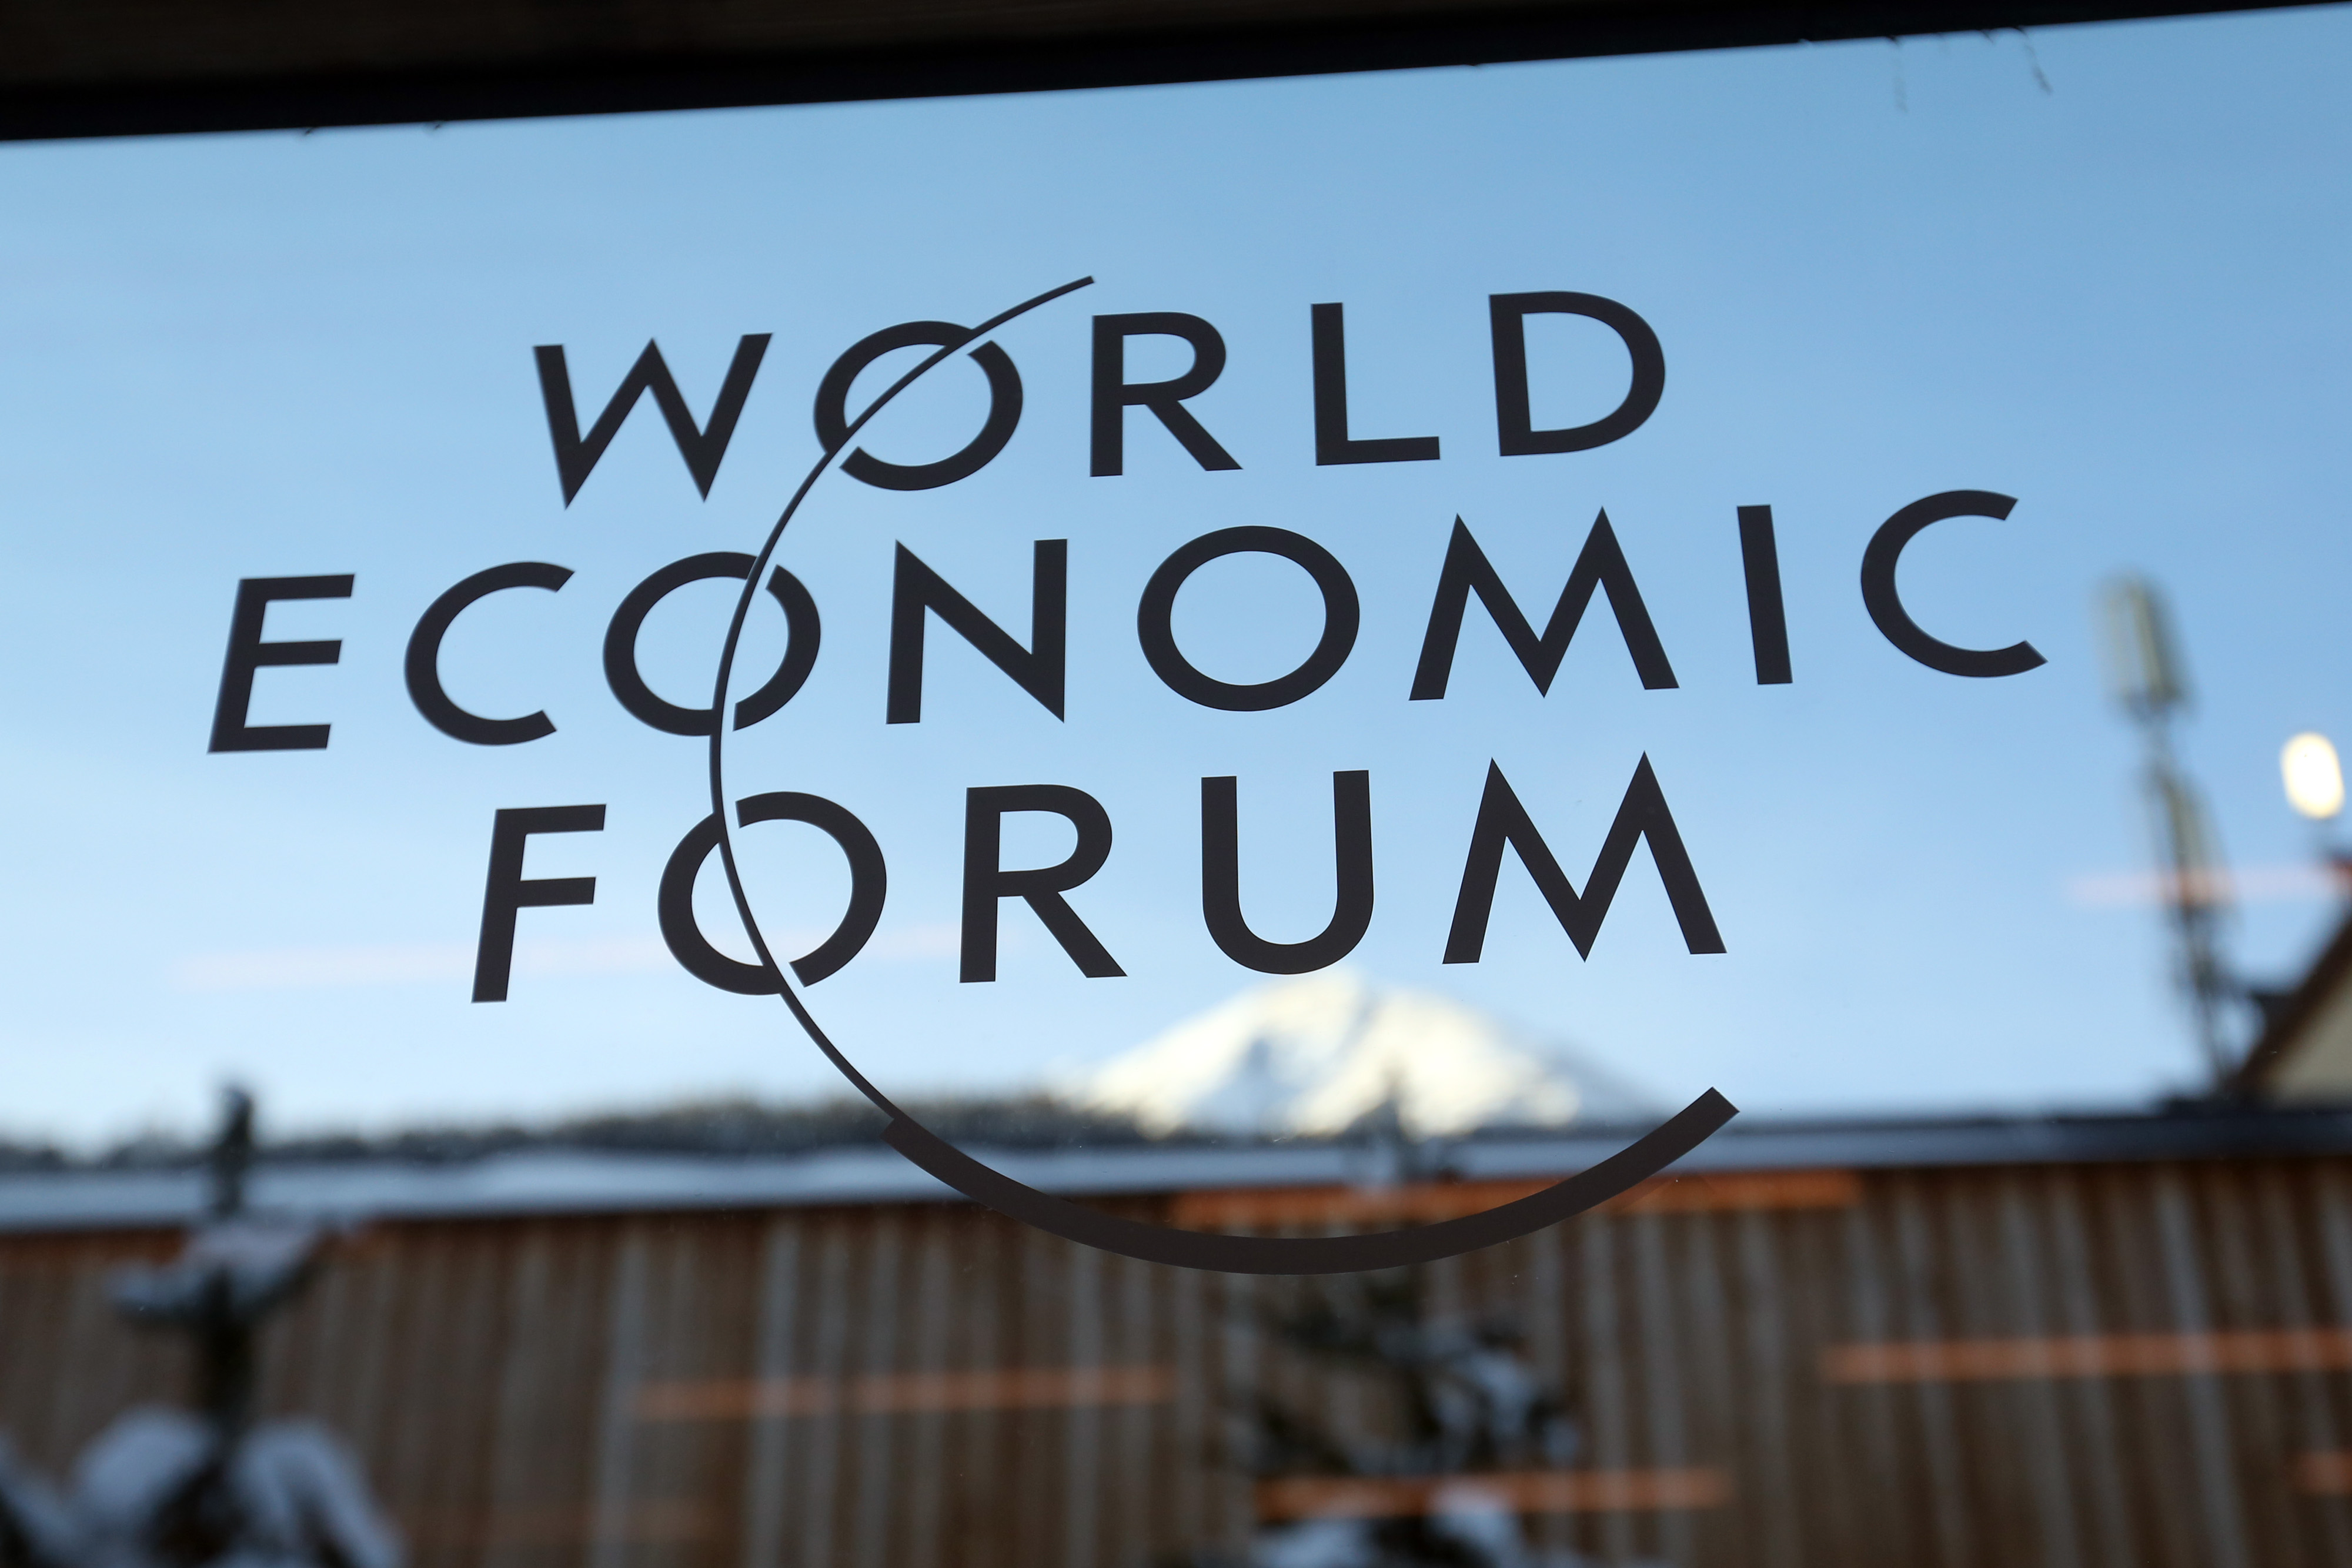 A logo sits on a glass panel inside the venue of the World Economic Forum (WEF) in Davos, Switzerland on Jan. 19, 2015.